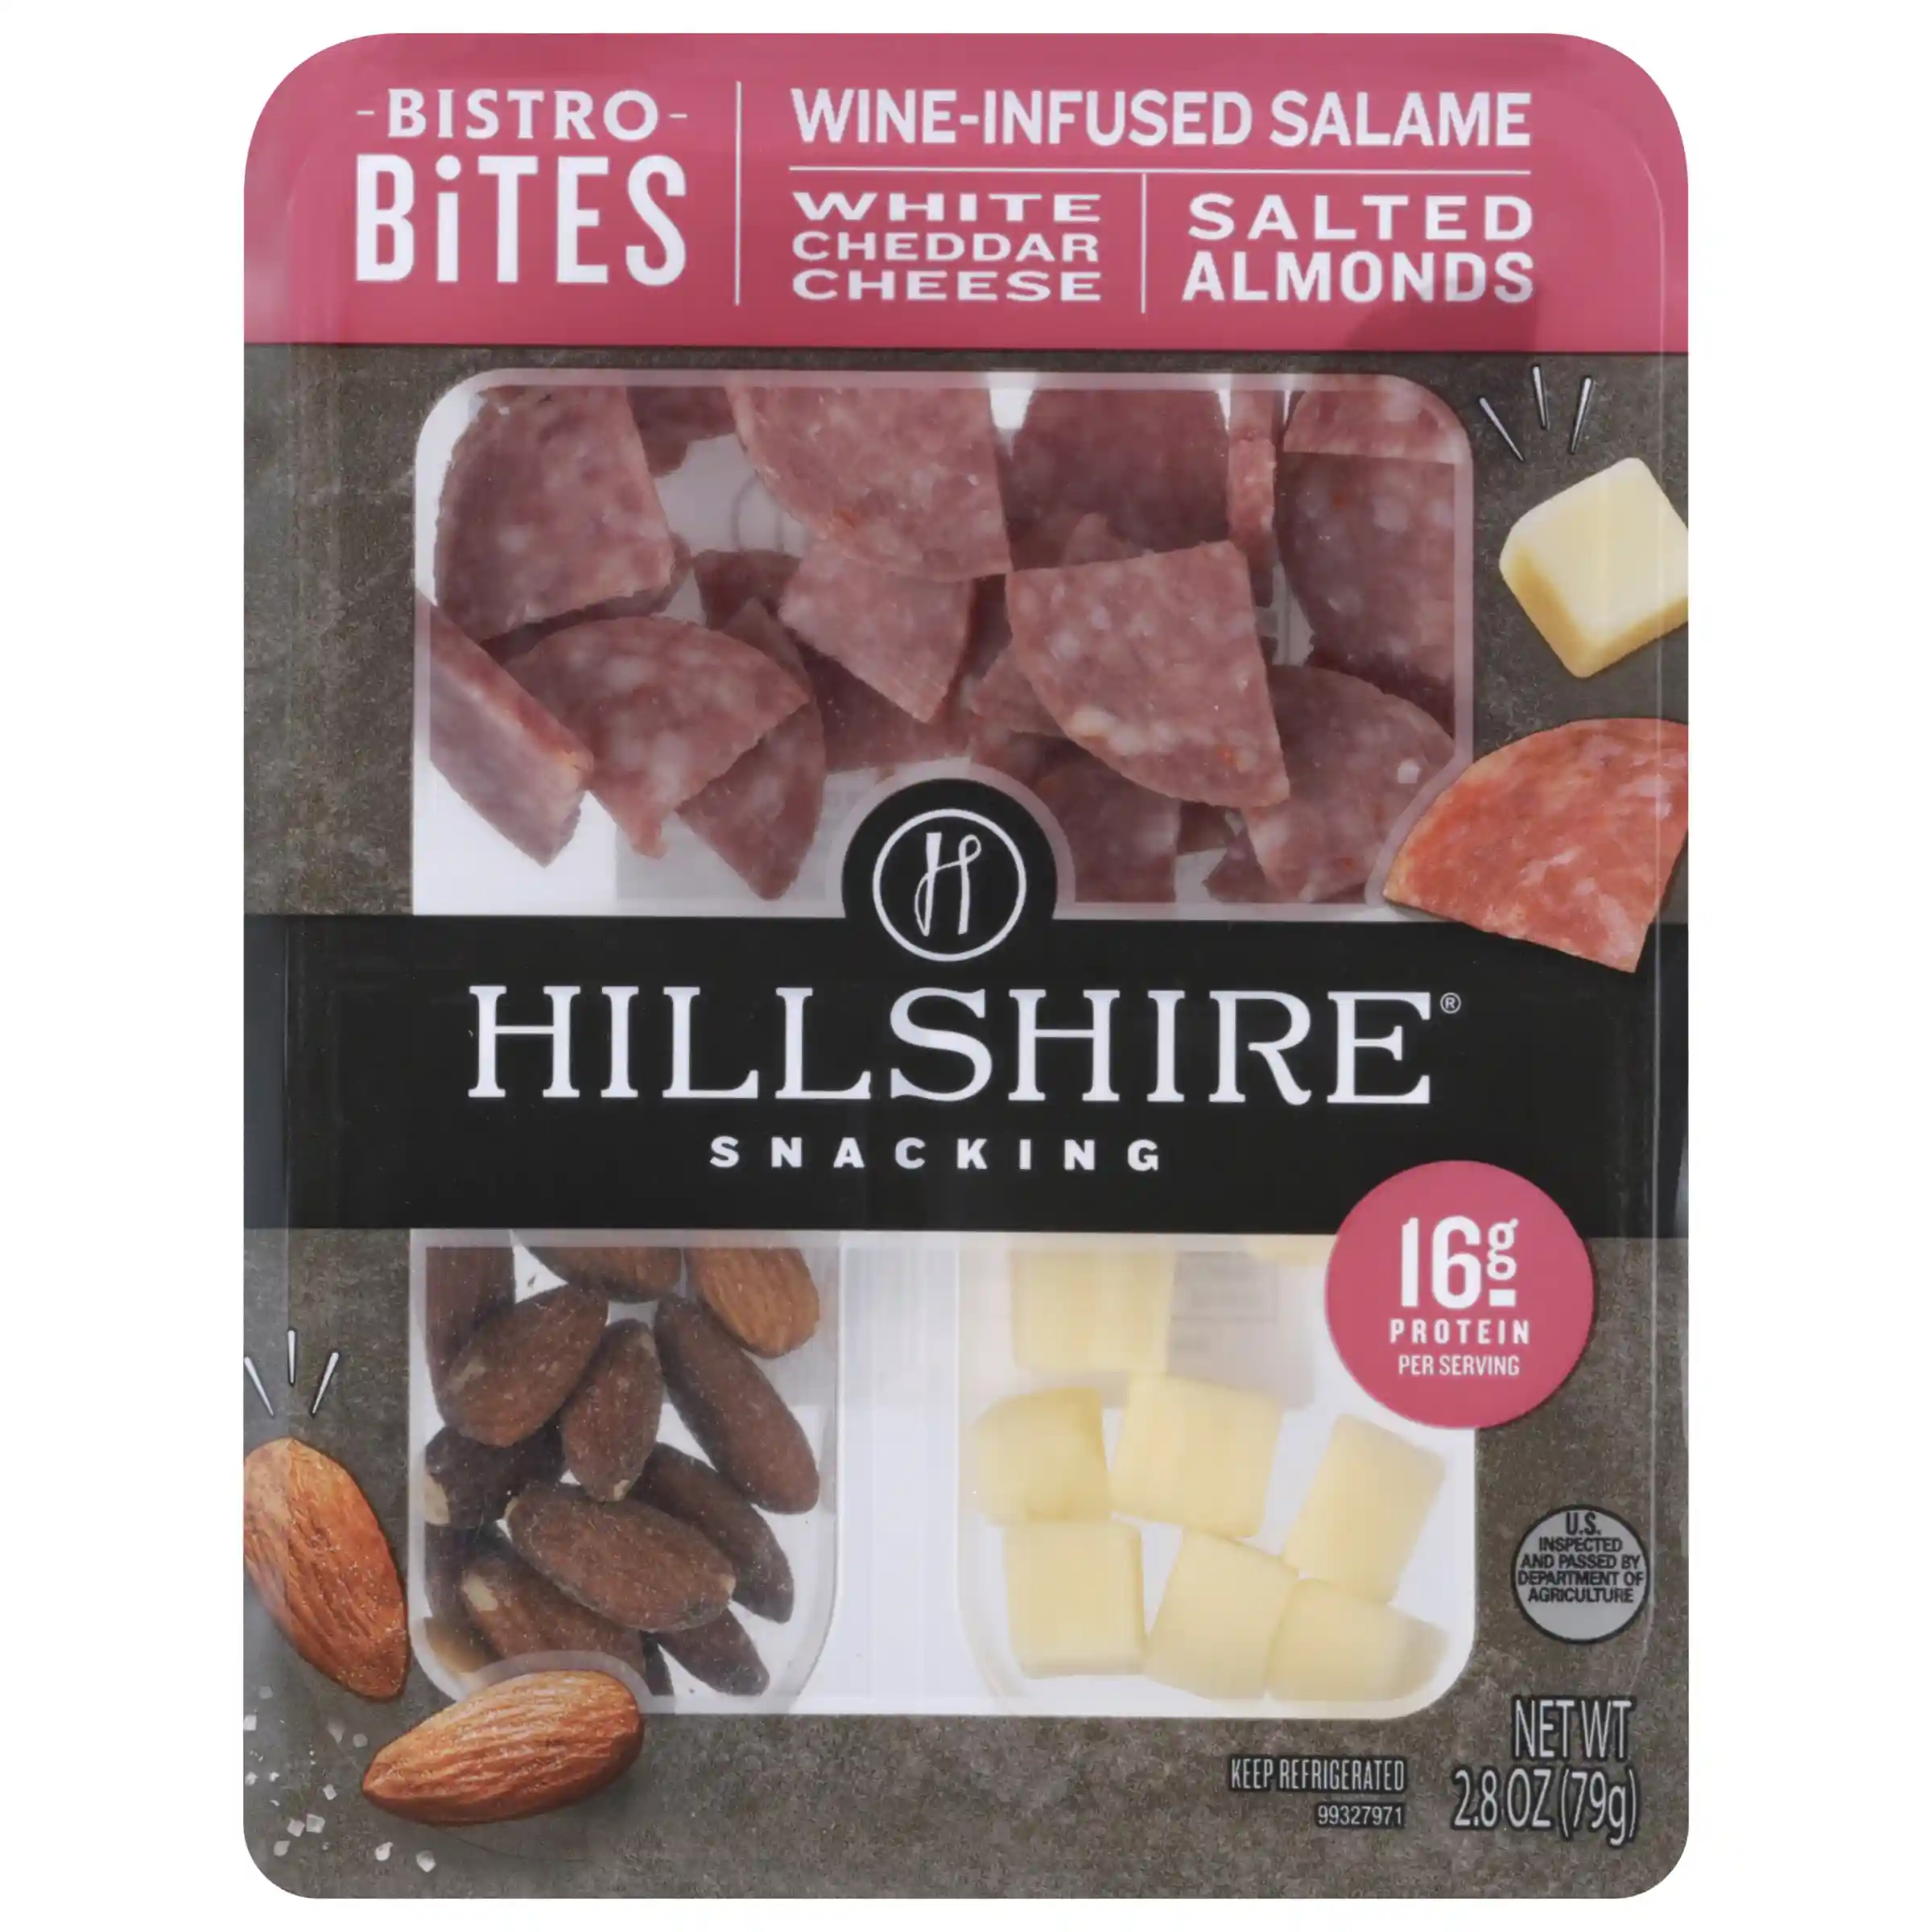 Hillshire Snacking Bistro Bites, Wine Infused Salami, White Cheddar Cheese, Salted Almonds, 2.8 oz_image_11